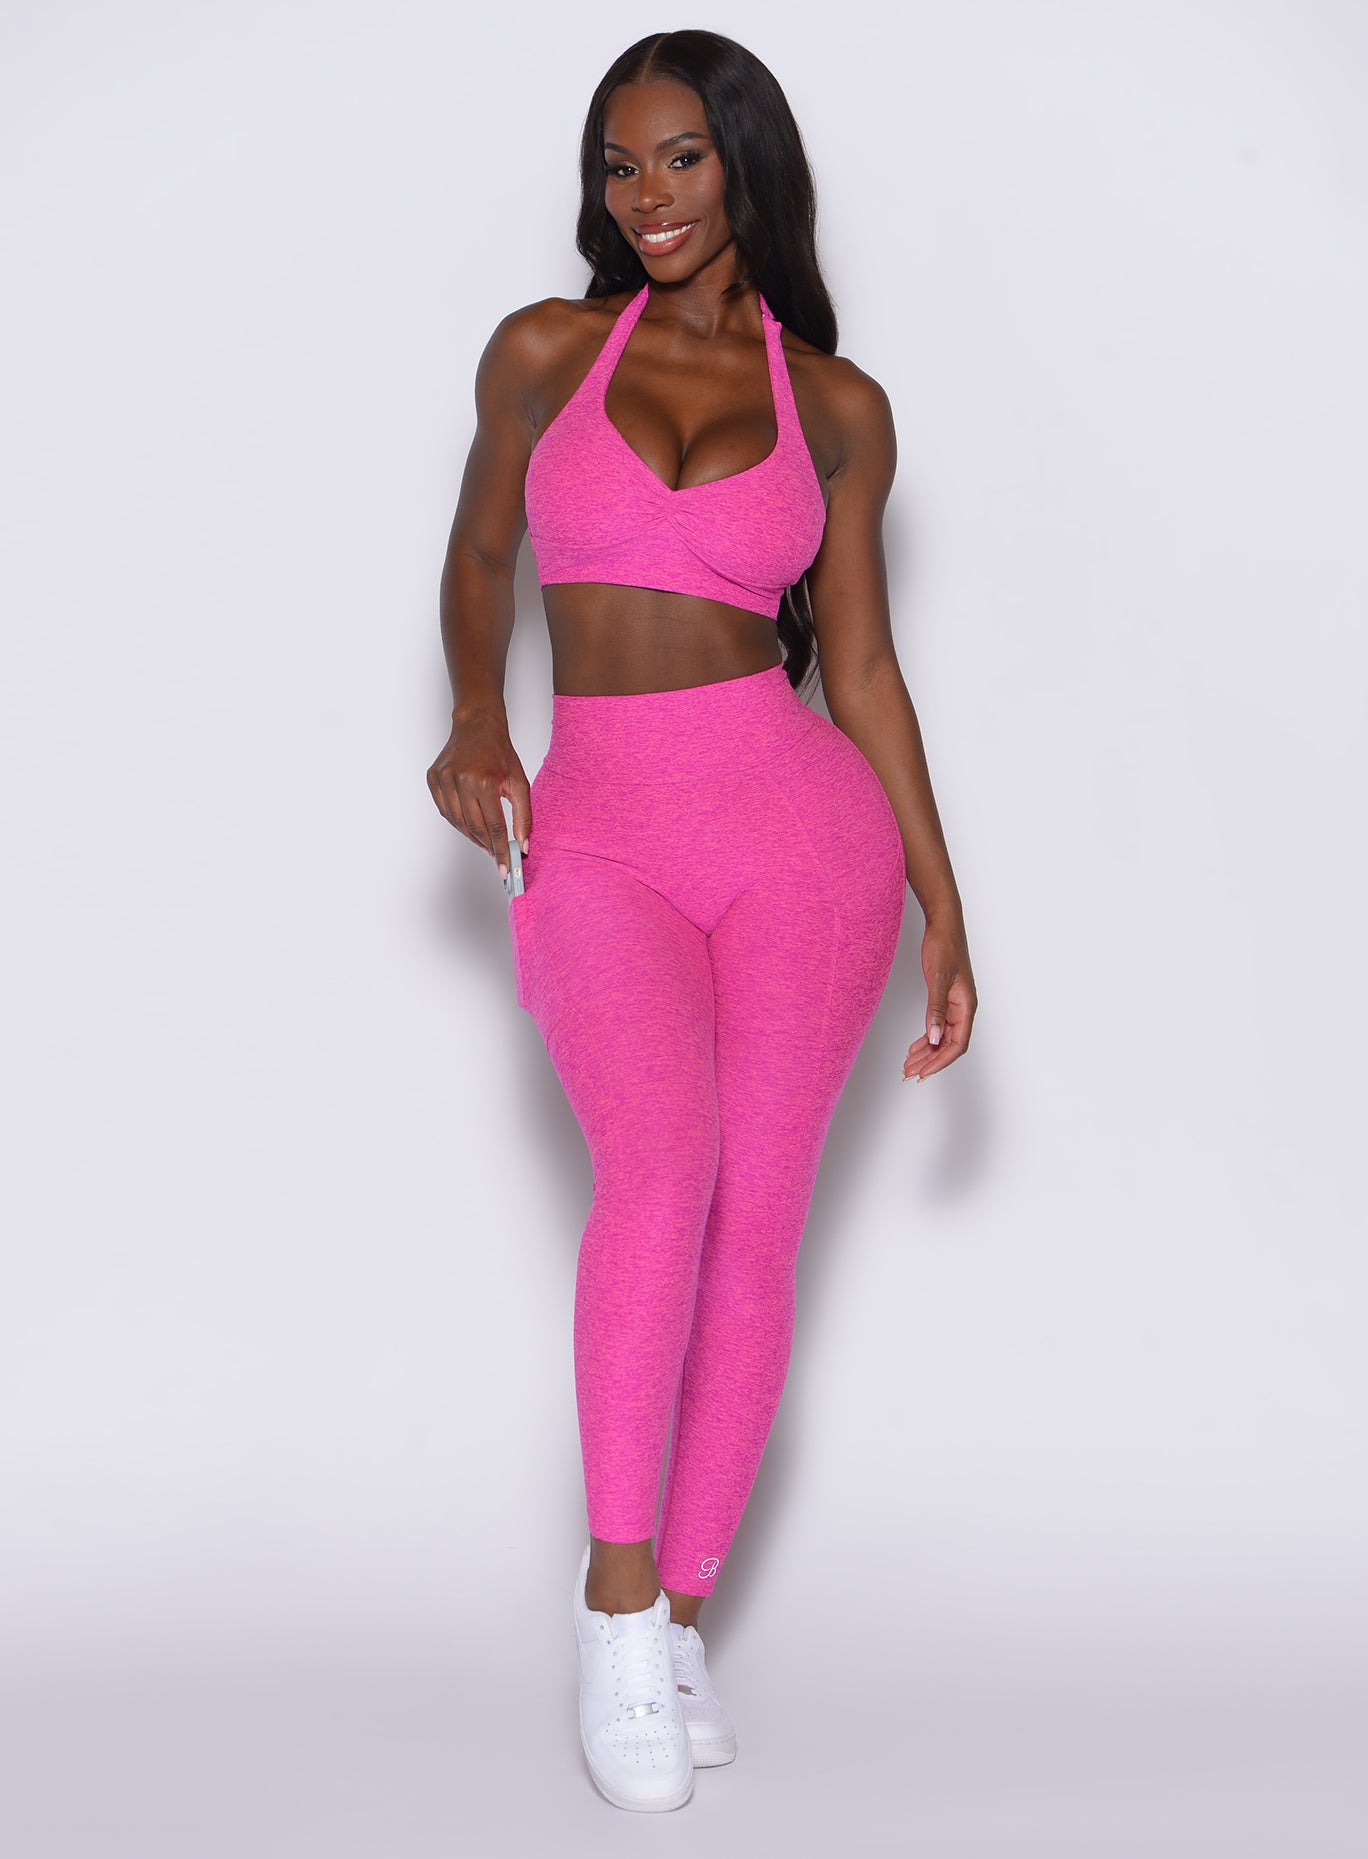 front profile view of a model wearing our V back leggings in Neon pink sorbet color along with a matching bra